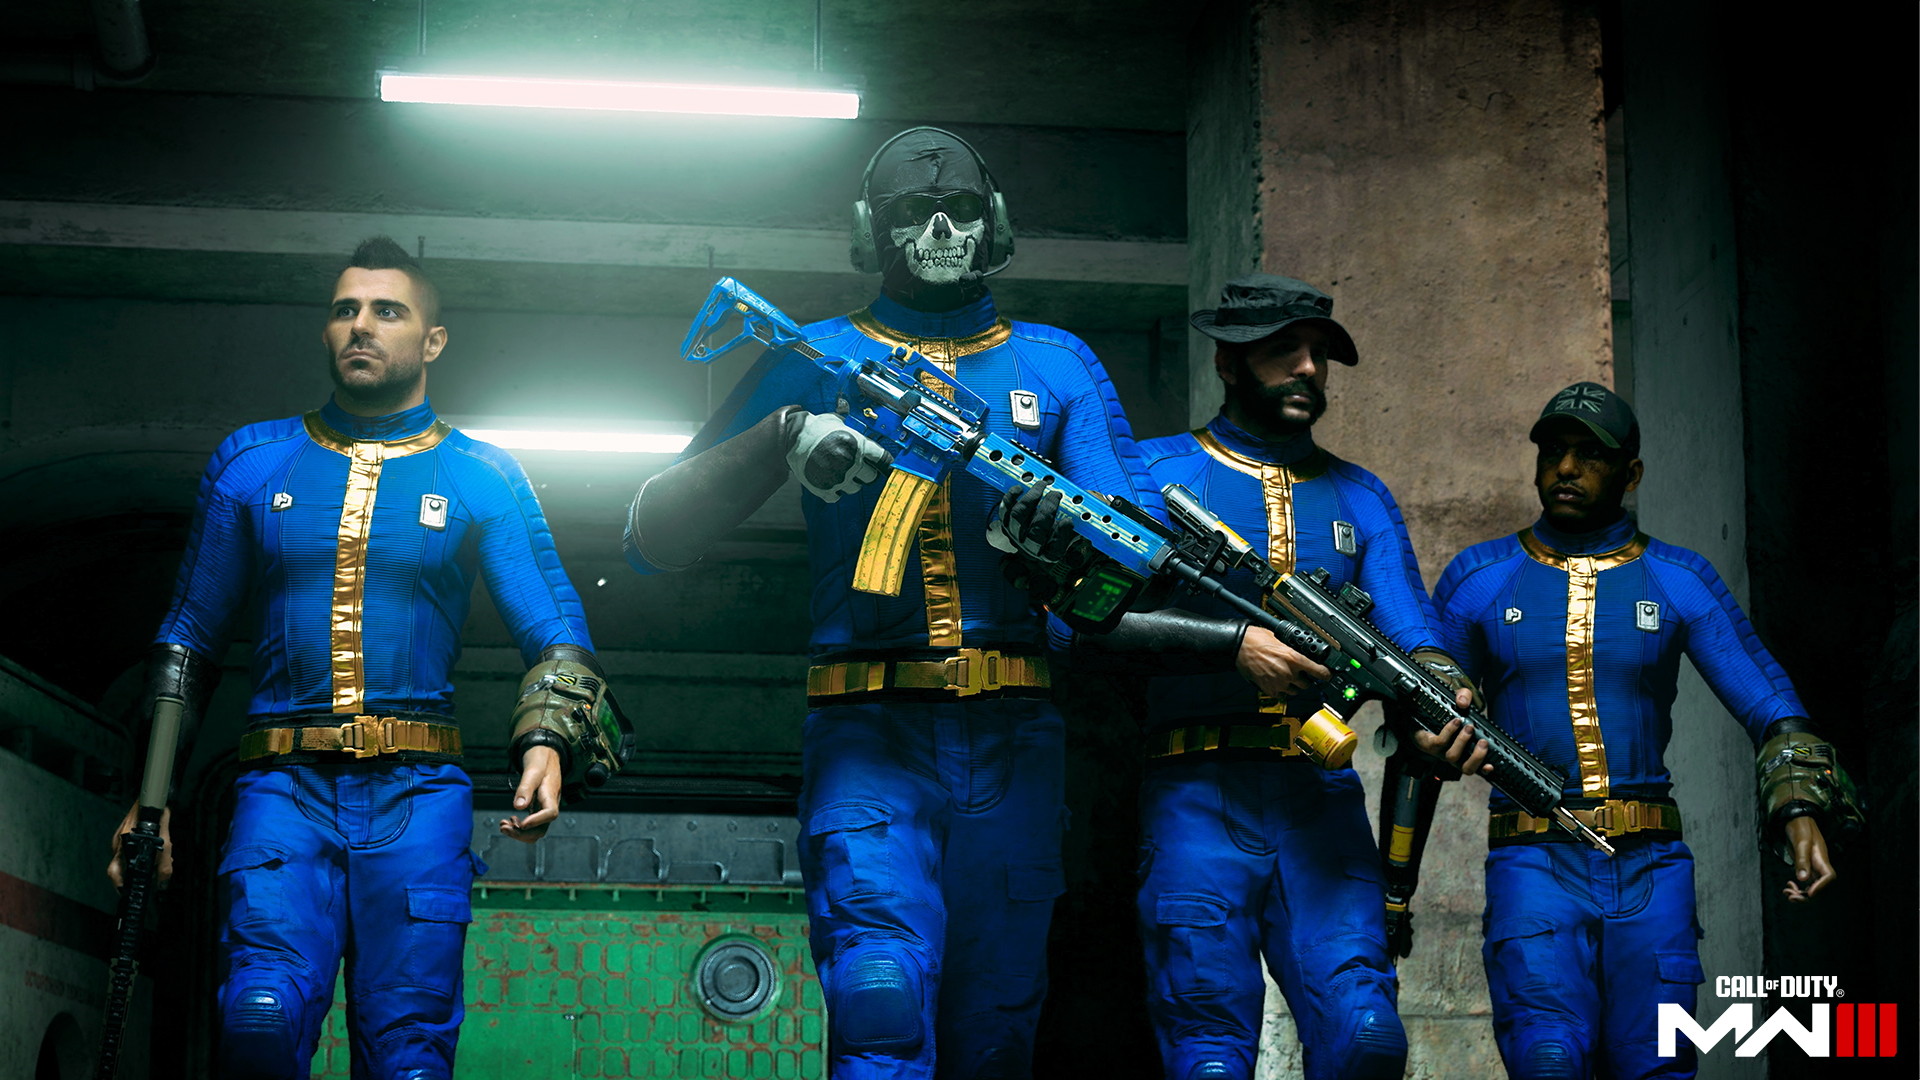 Call of Duty's four operators, dressed in Fallout Vault suits, stride down a subterranean corridor lit overhead by fluorescent lights